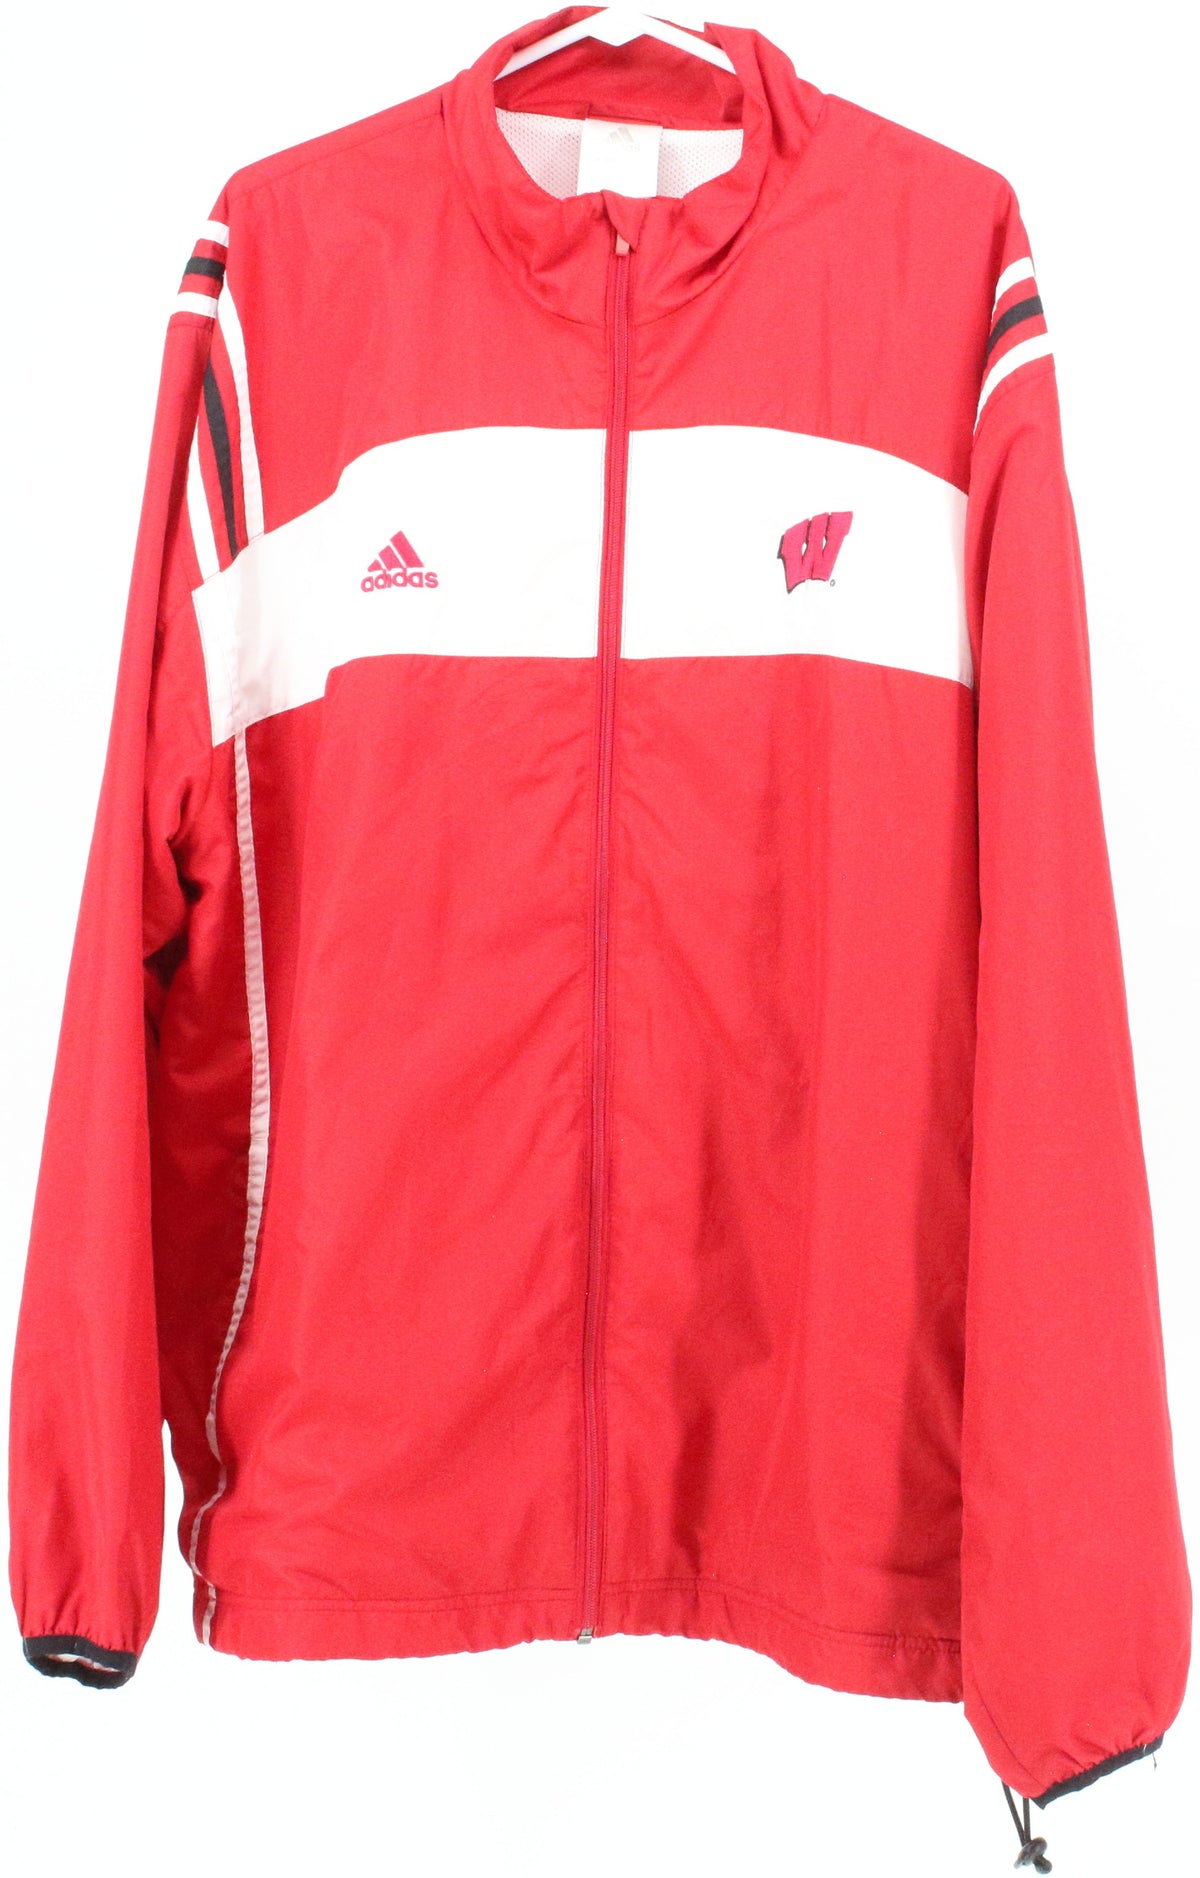 Adidas Red and White Wisconsin Jacket